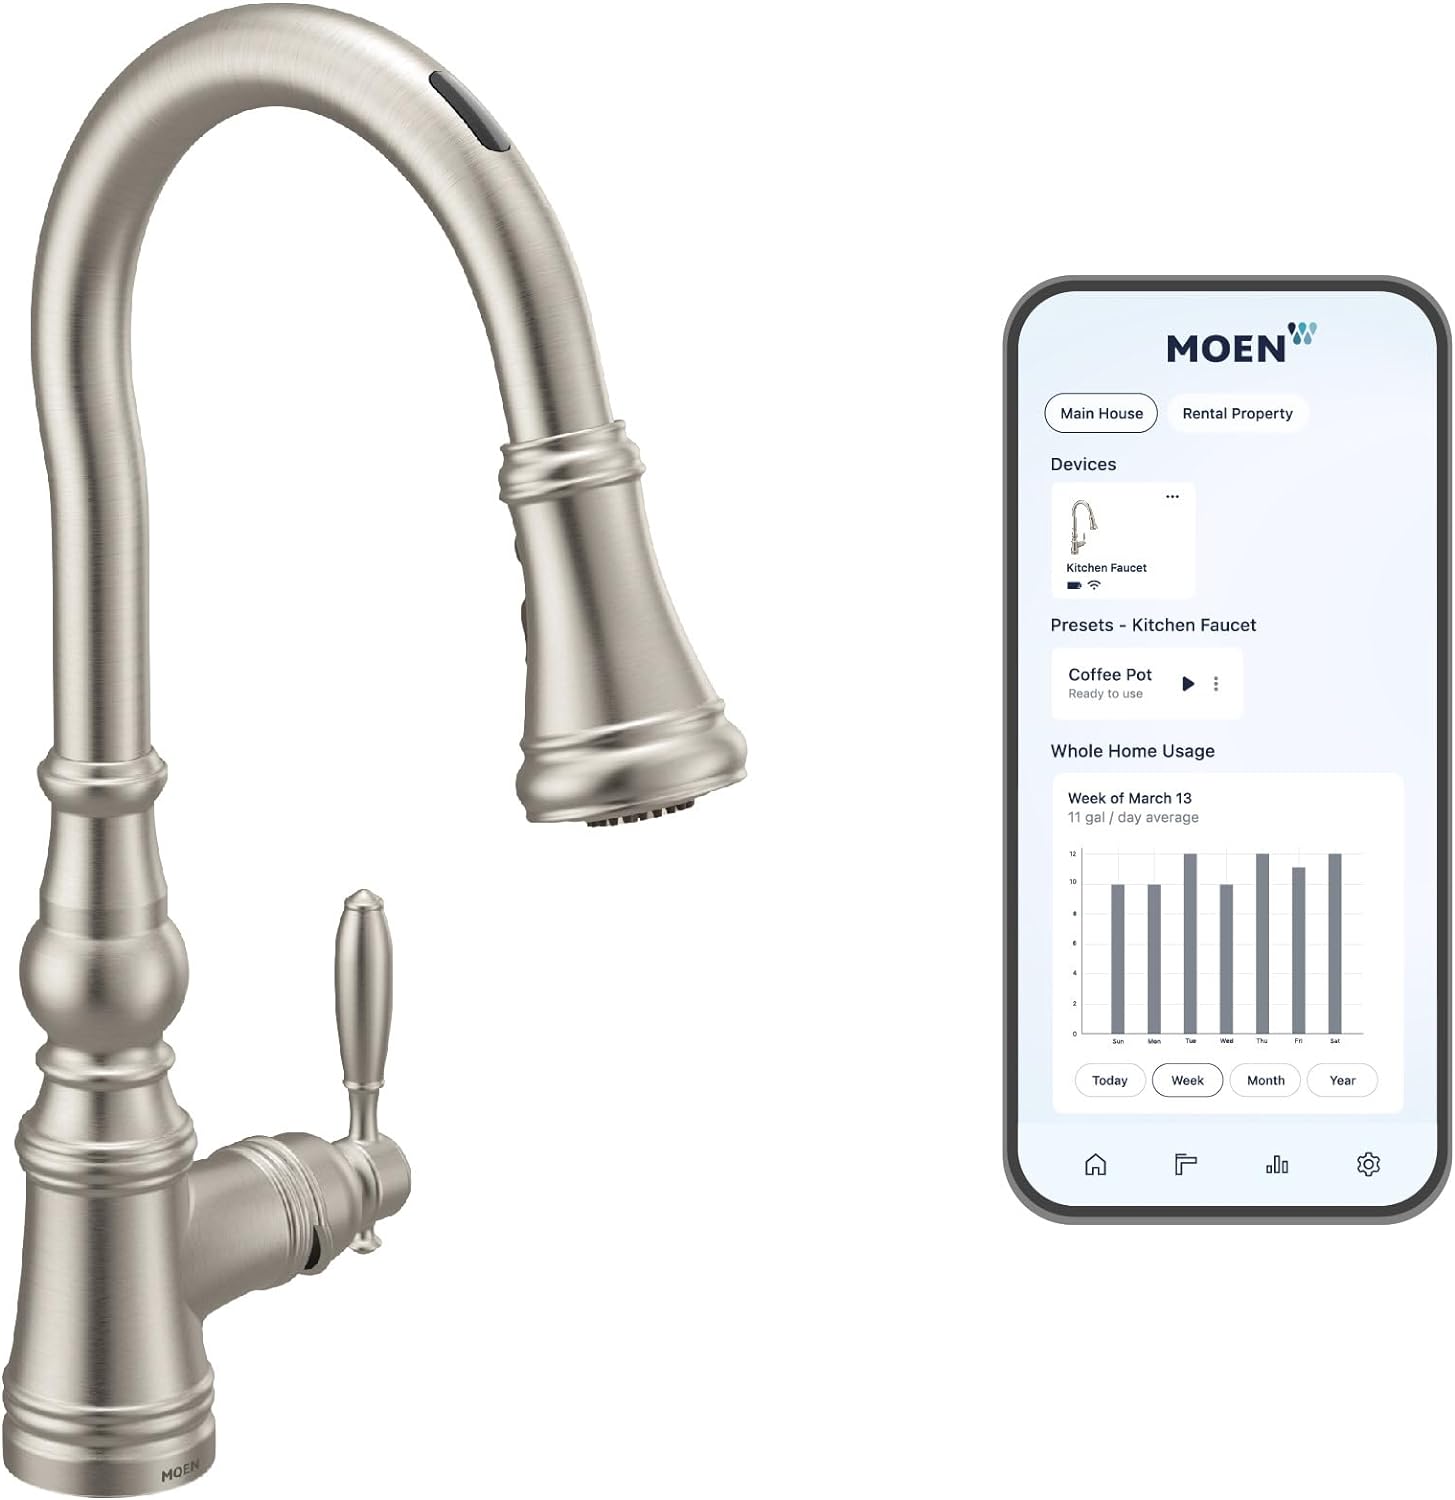 Moen S73004EVSRS Weymouth Smart Touchless Pull Down Sprayer Kitchen Faucet with Voice Control and Power Boost, Spot Resist Stainless